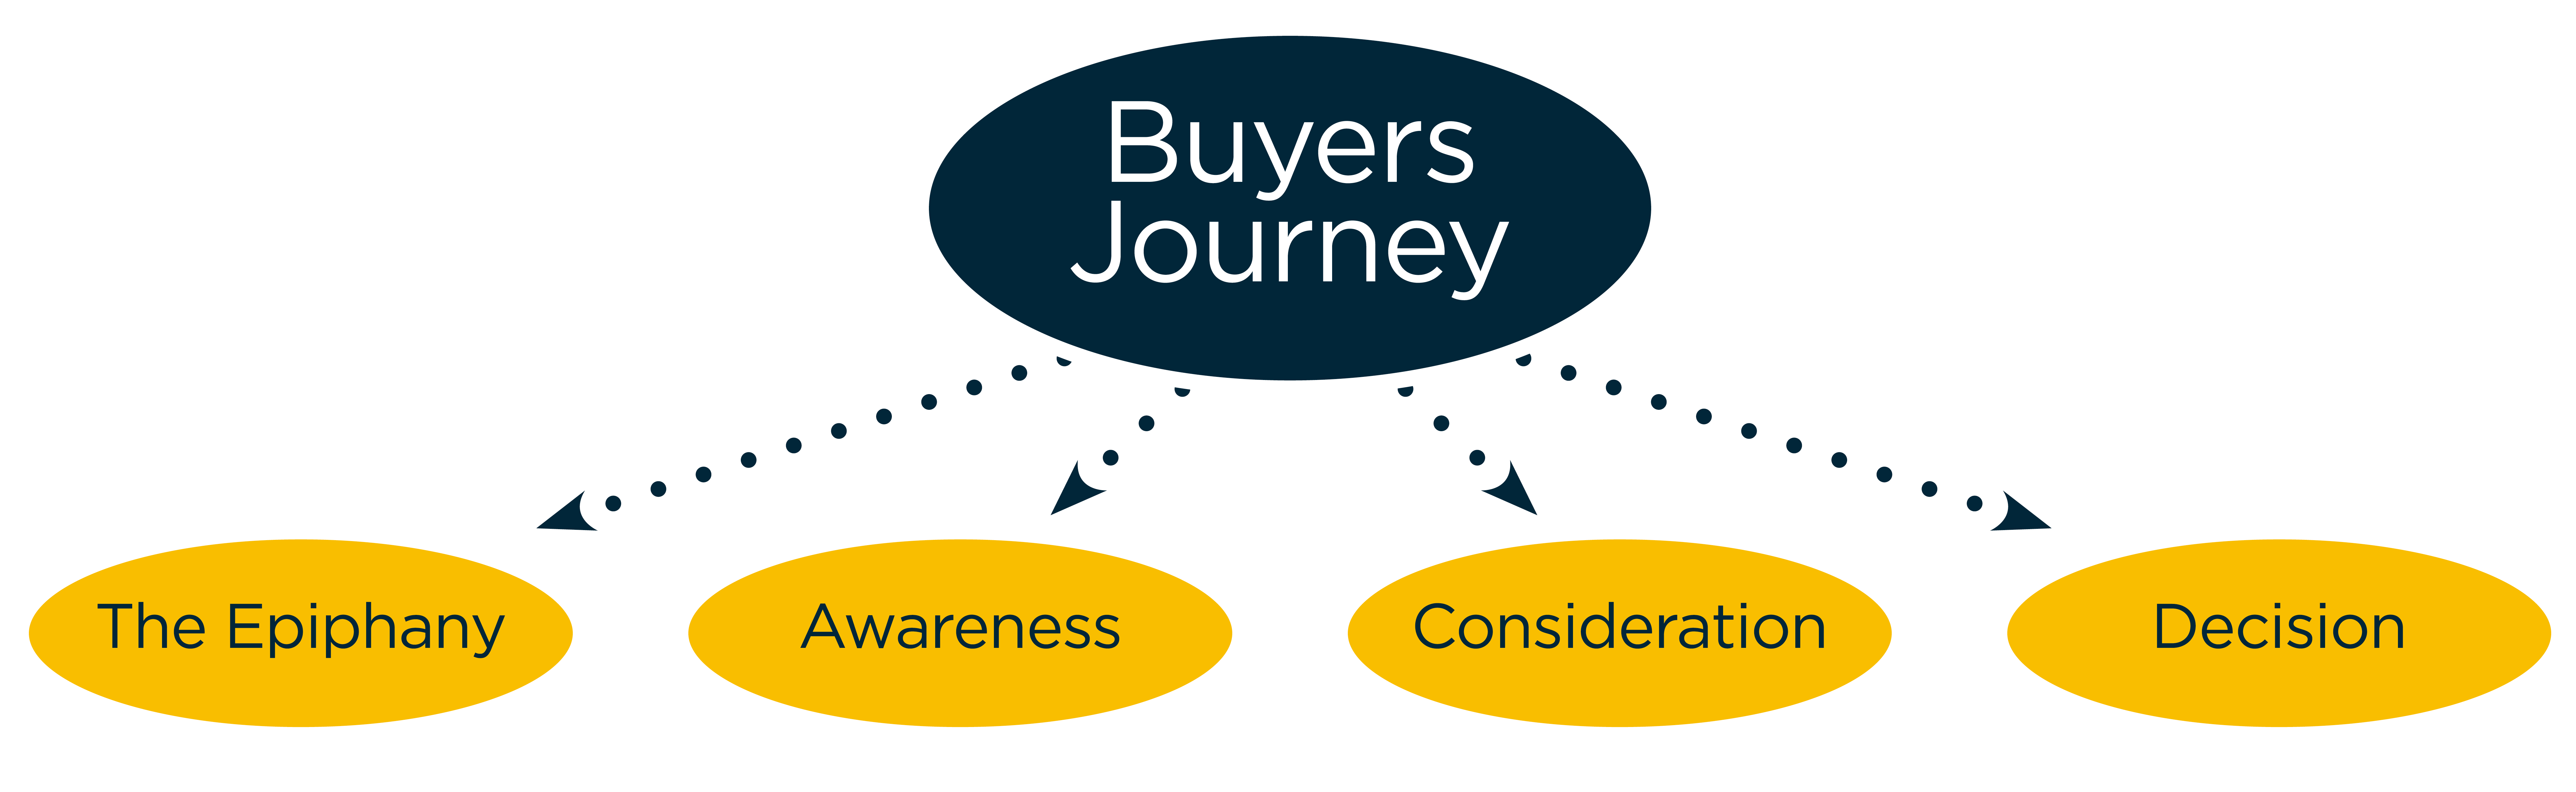 BuyersJourney.png